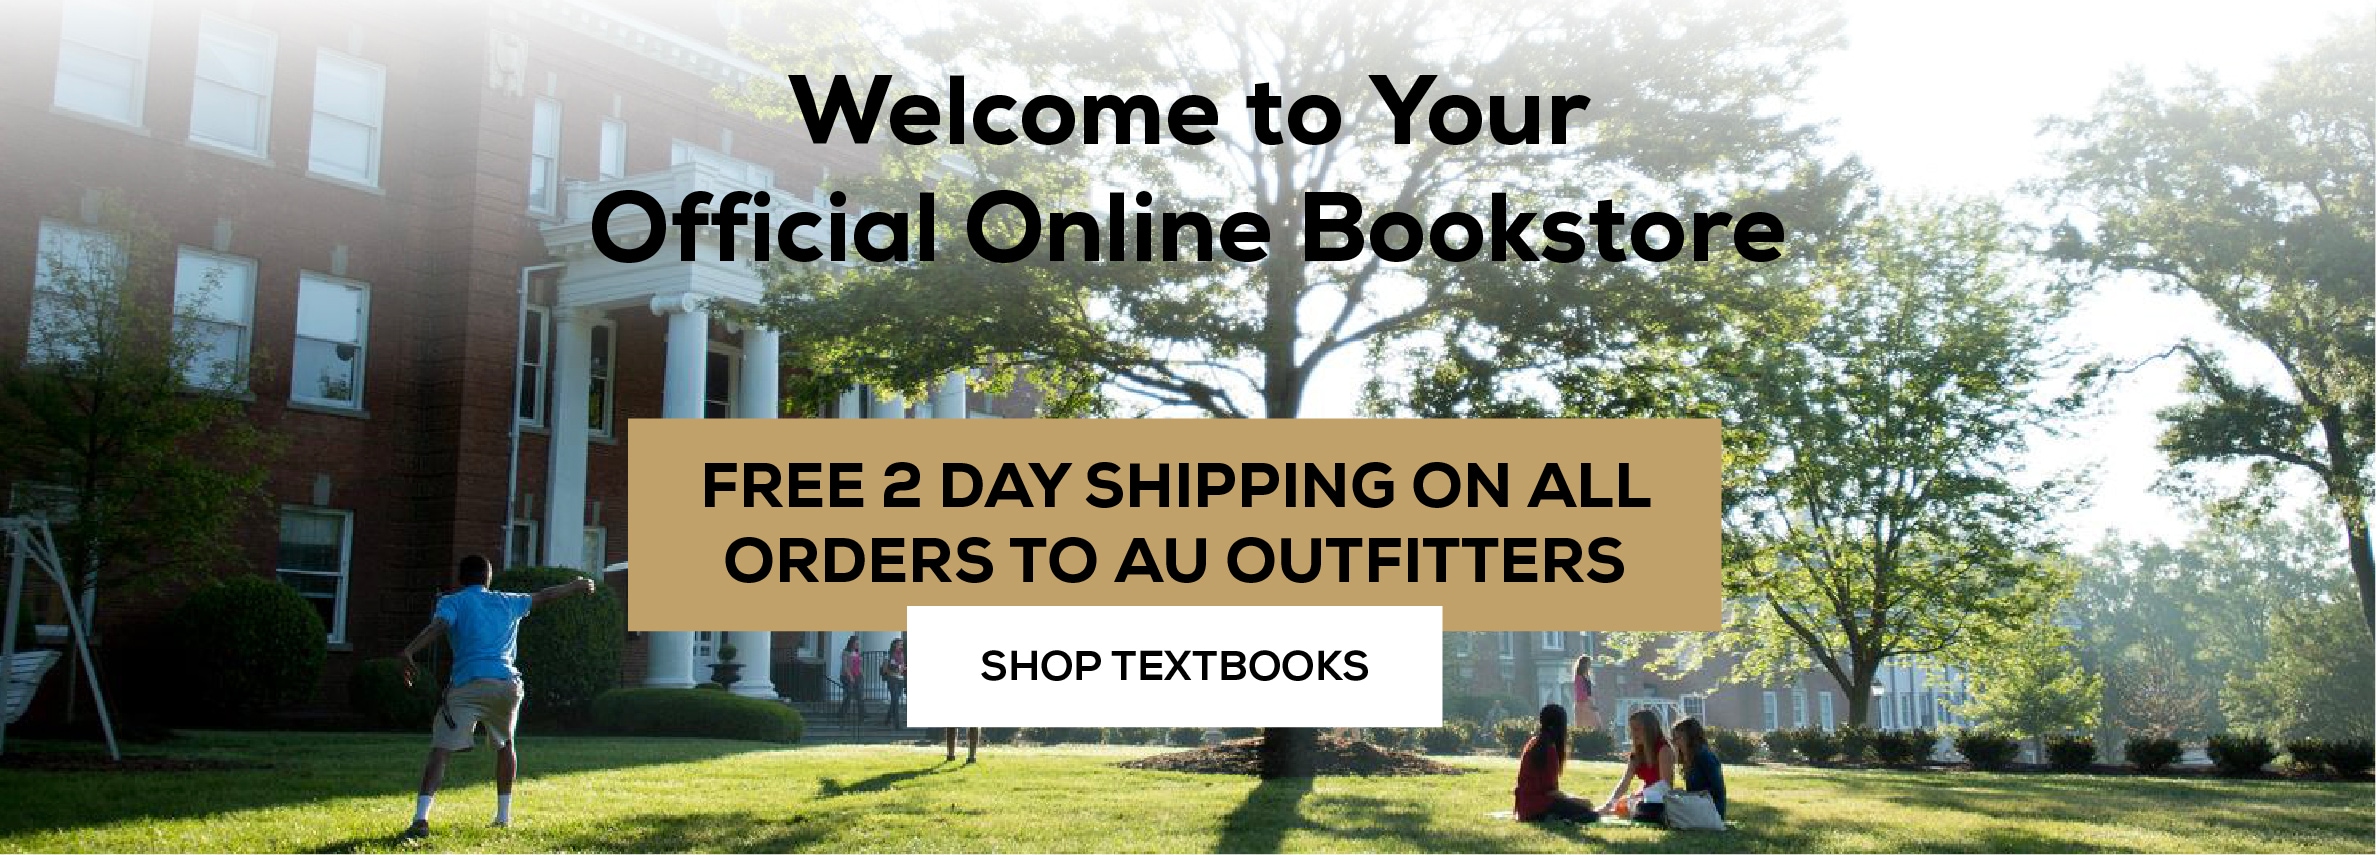 Welcome to Your Official Online Bookstore. Free 2 Day Shipping on all orders to AU Outfitters. Shop Textbooks